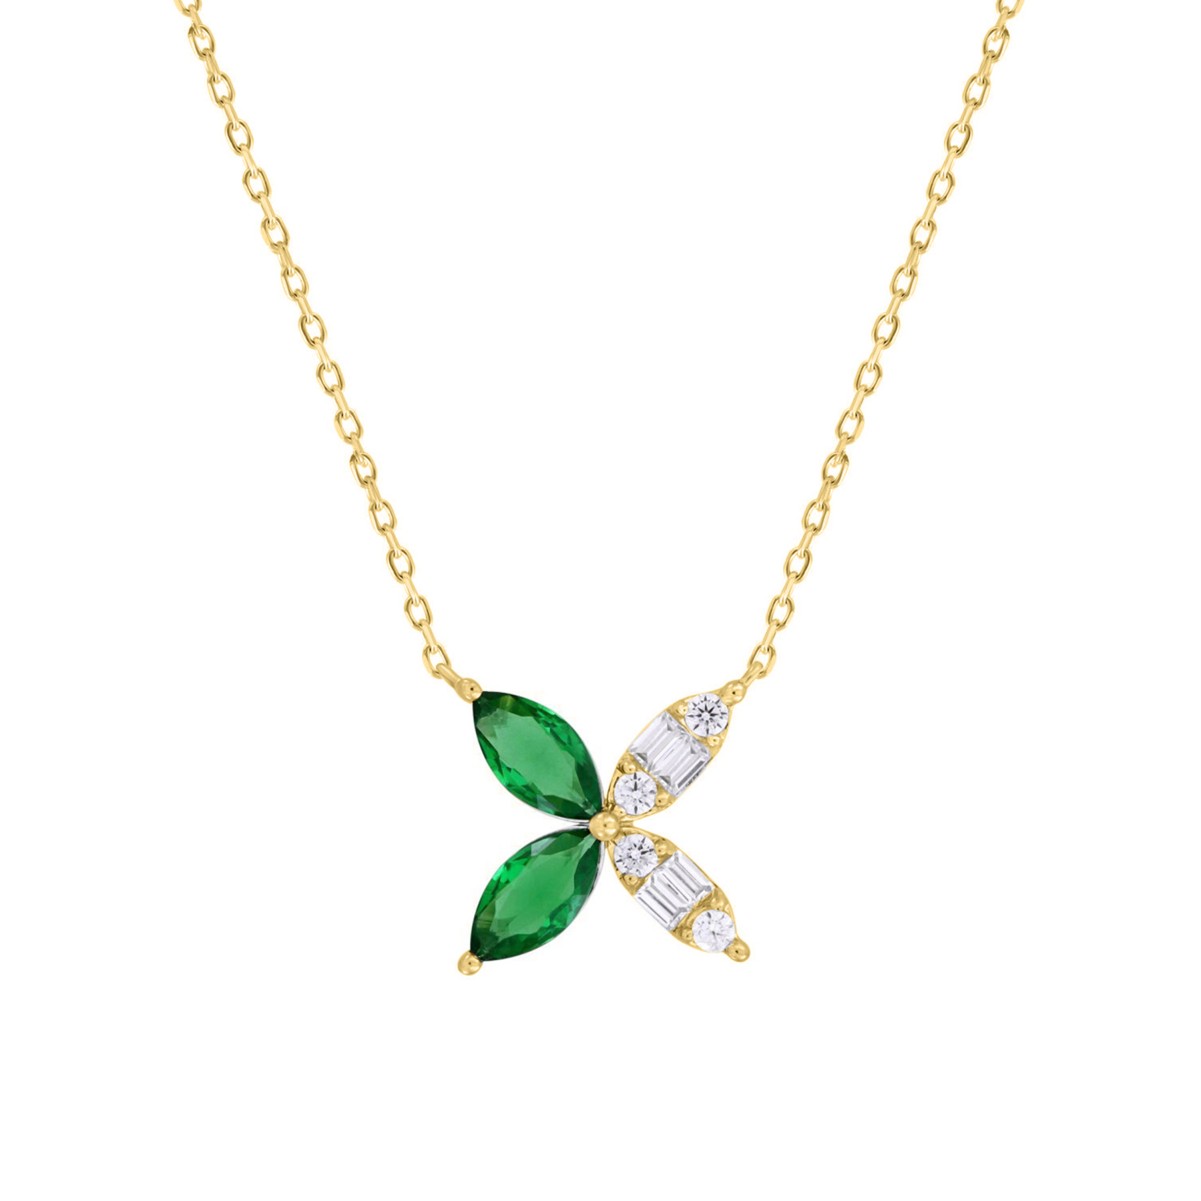 14K YELLOW GOLD 1 3/4CT ROUND/BAGUETTE/MARQUISE DIAMOND LADIES PENDANT WITH CHAIN  (COLOUR STONE MARQUISE DIAMOND 1 5/8CT)